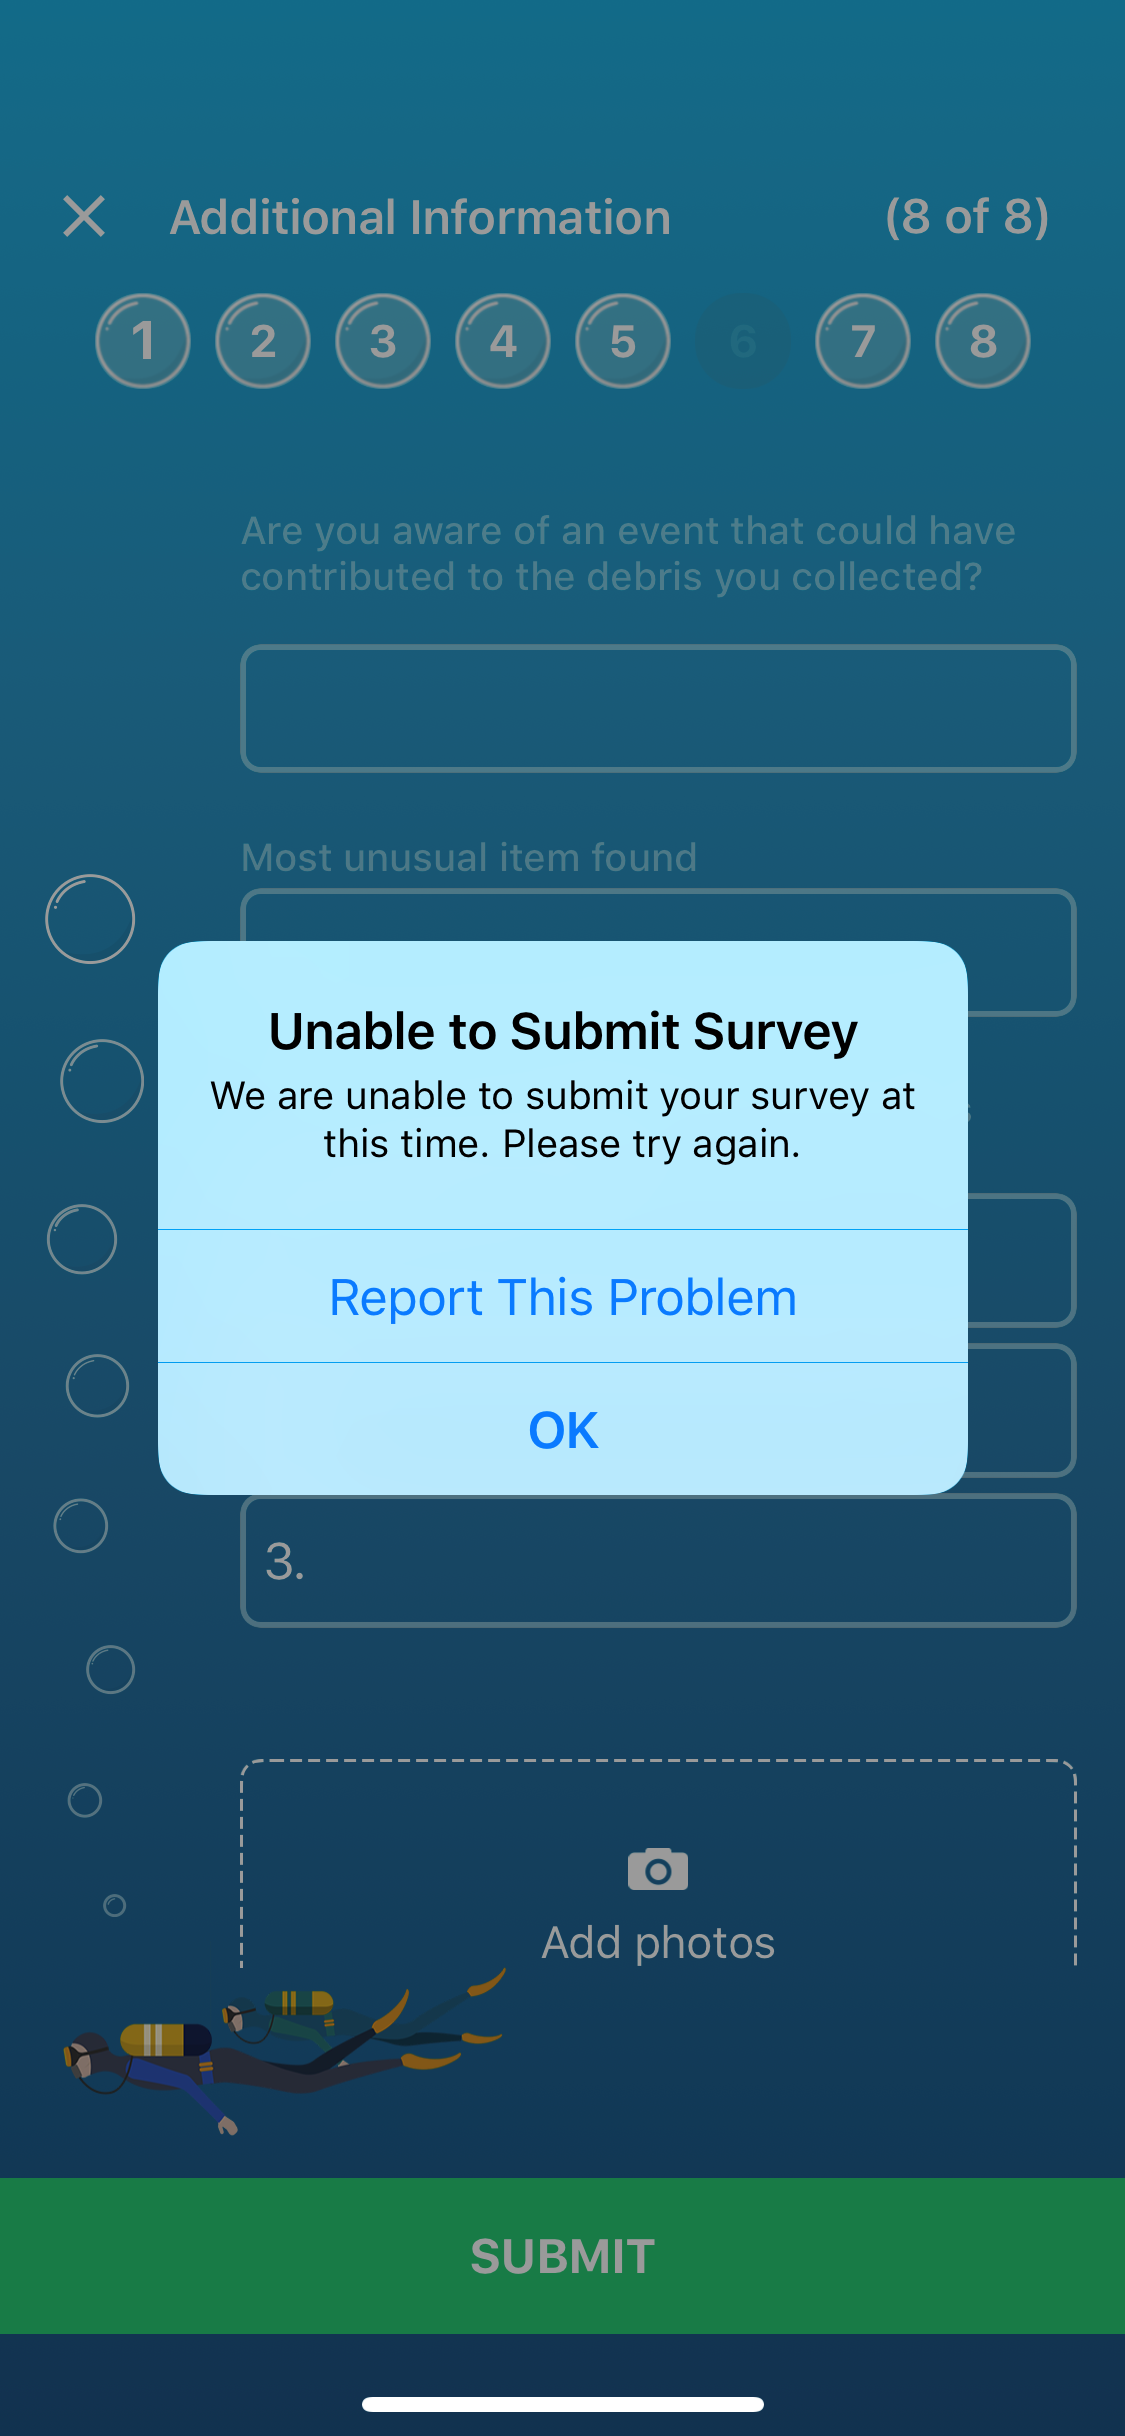 Error message for unable to submit